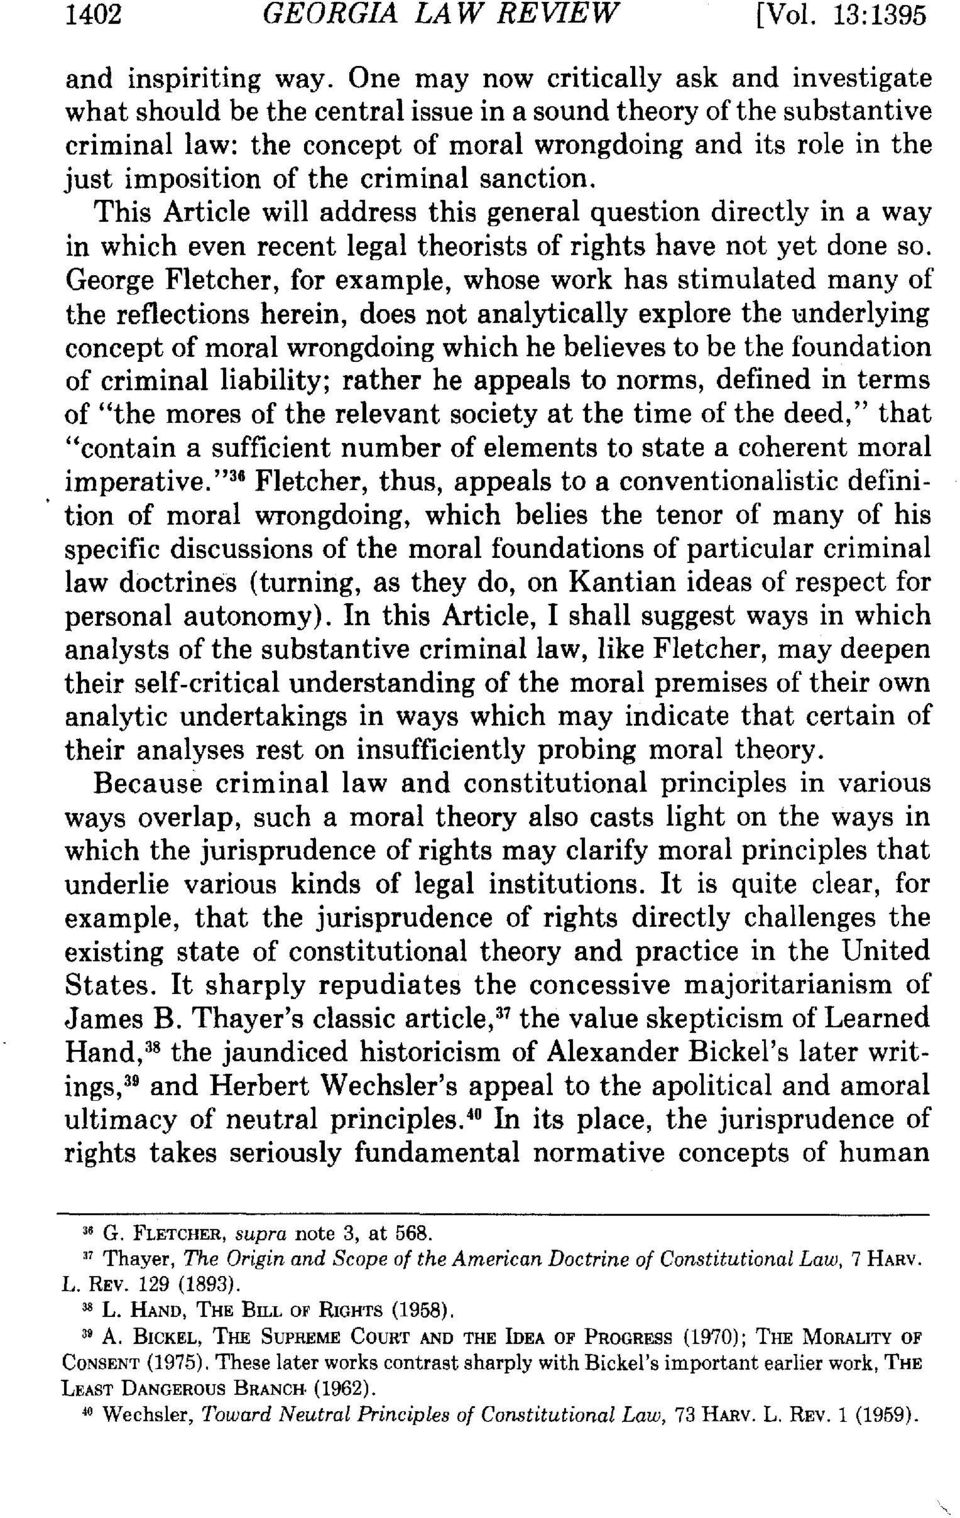 the criminal sanction. This Article will address this general question directly in a way in which even recent legal theorists of rights have not yet done so.